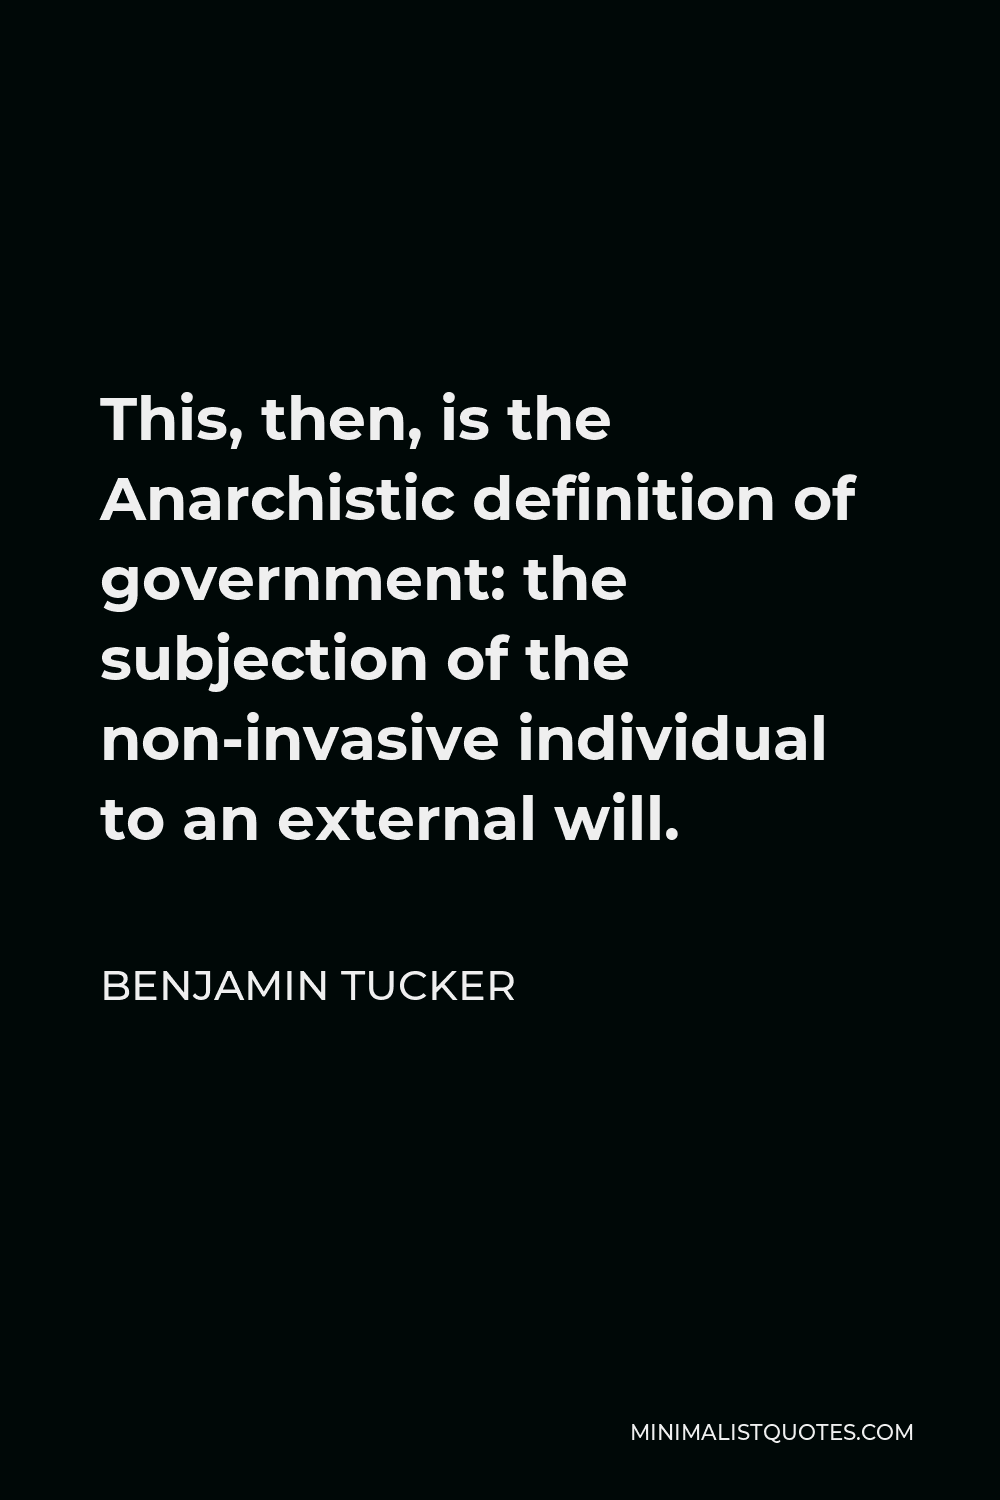 Benjamin Tucker Quote - This, then, is the Anarchistic definition of government: the subjection of the non-invasive individual to an external will.